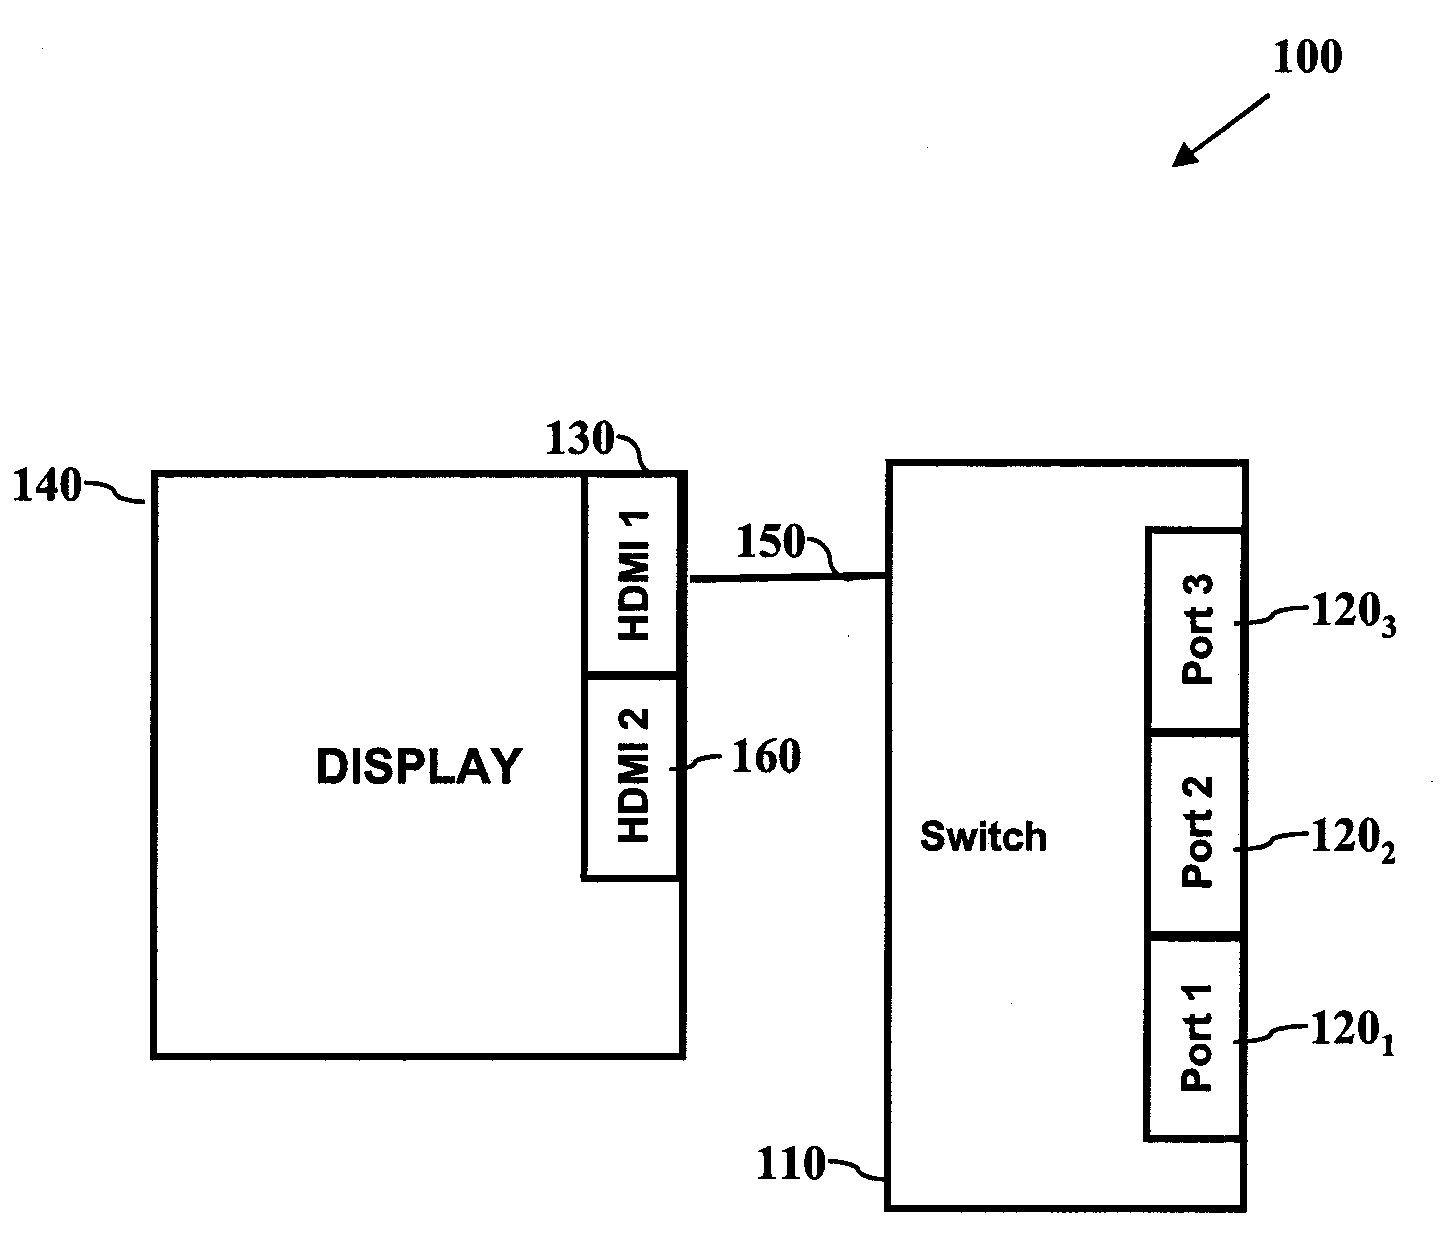 Method and Apparatus for Simulating Consumer Electronic Control Functionality for Devices